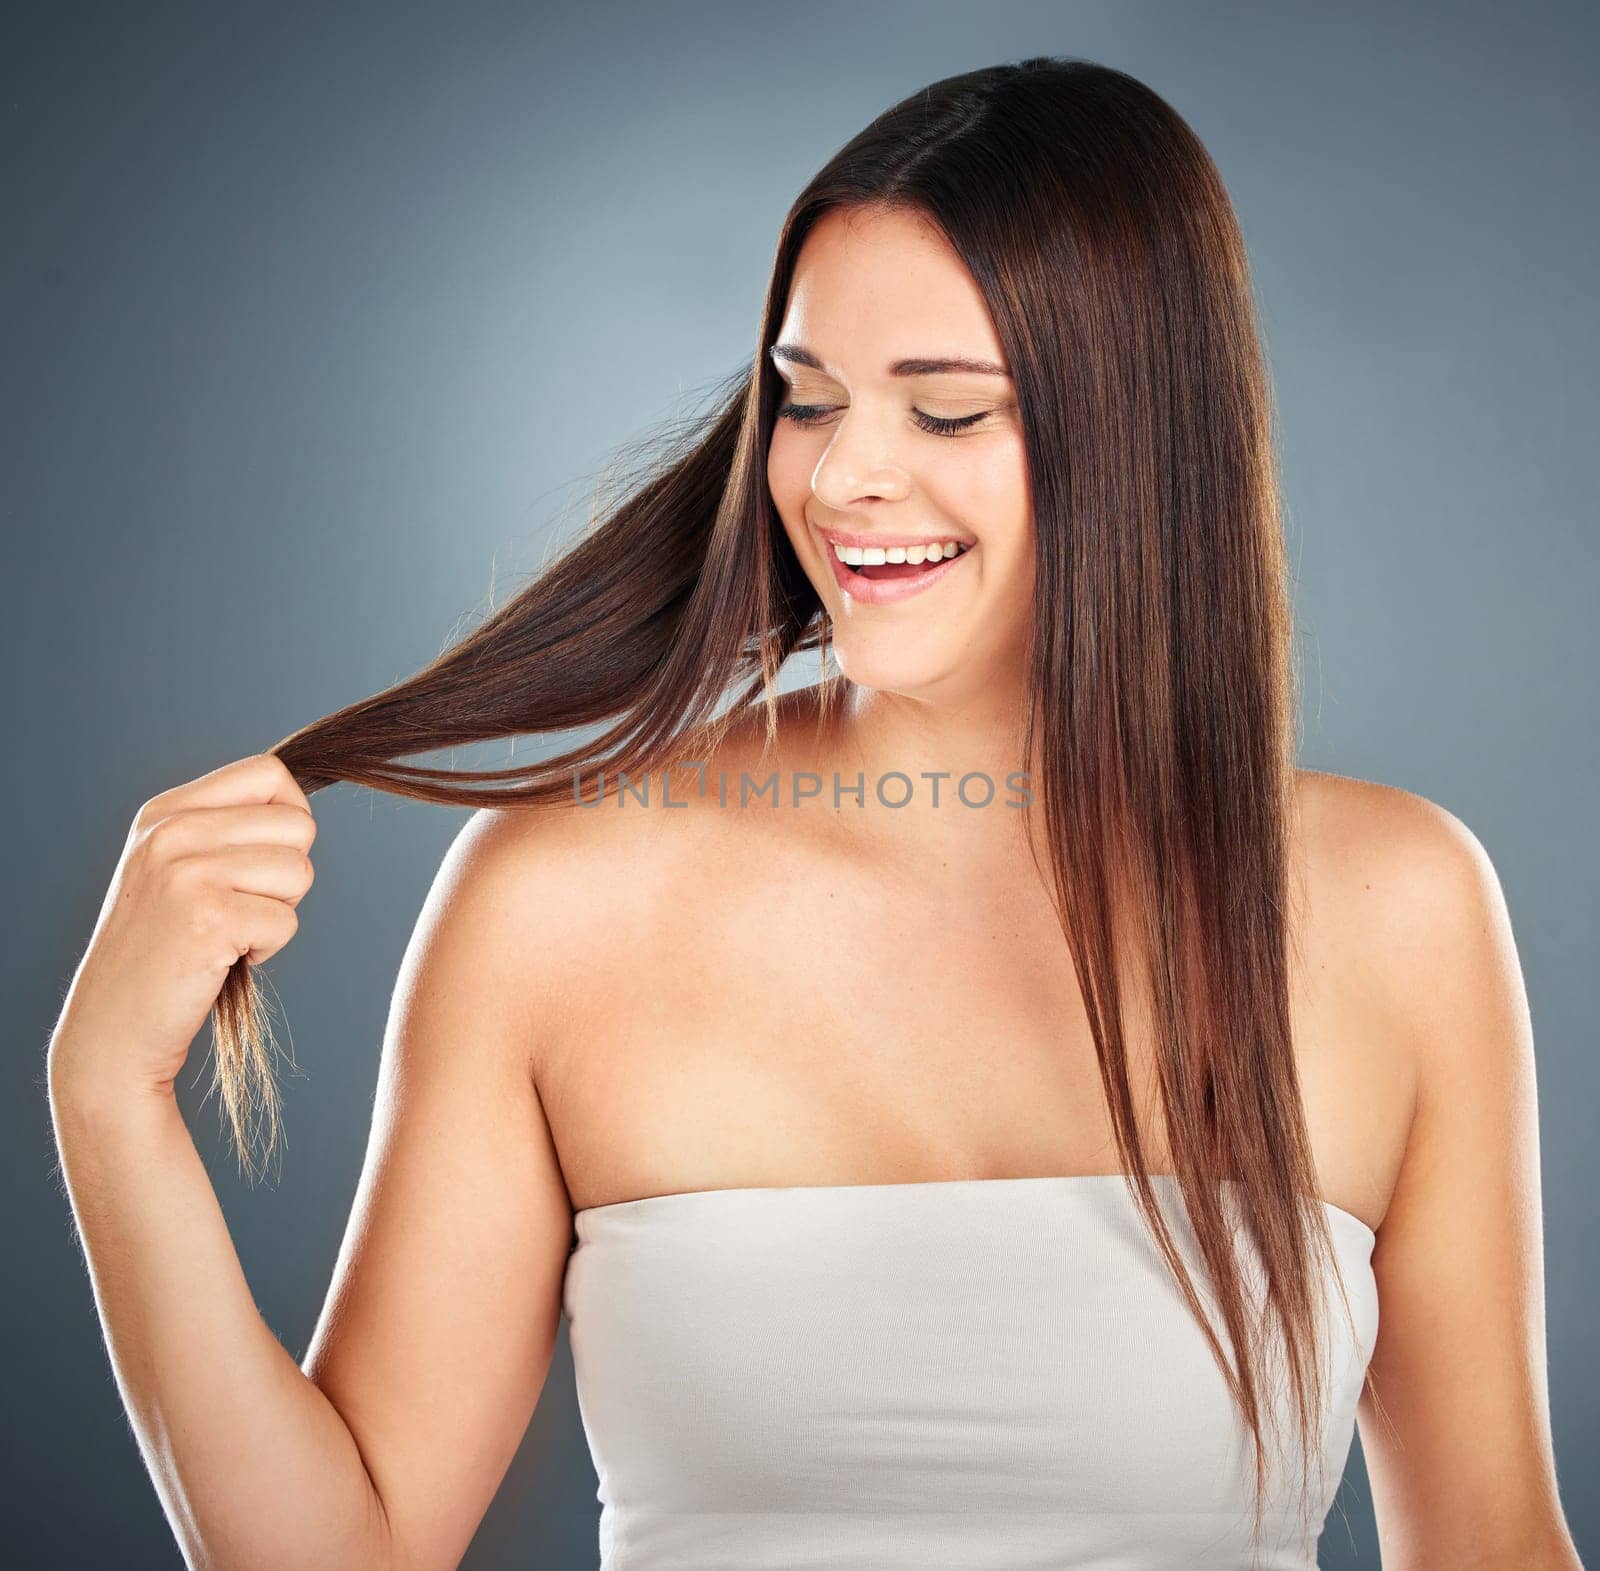 Hair care, woman and hair growth progress after keratin salon treatment with happiness. Smooth hairstyle texture of a model with extensions happy about wellness, health and hair color beauty shine by YuriArcurs